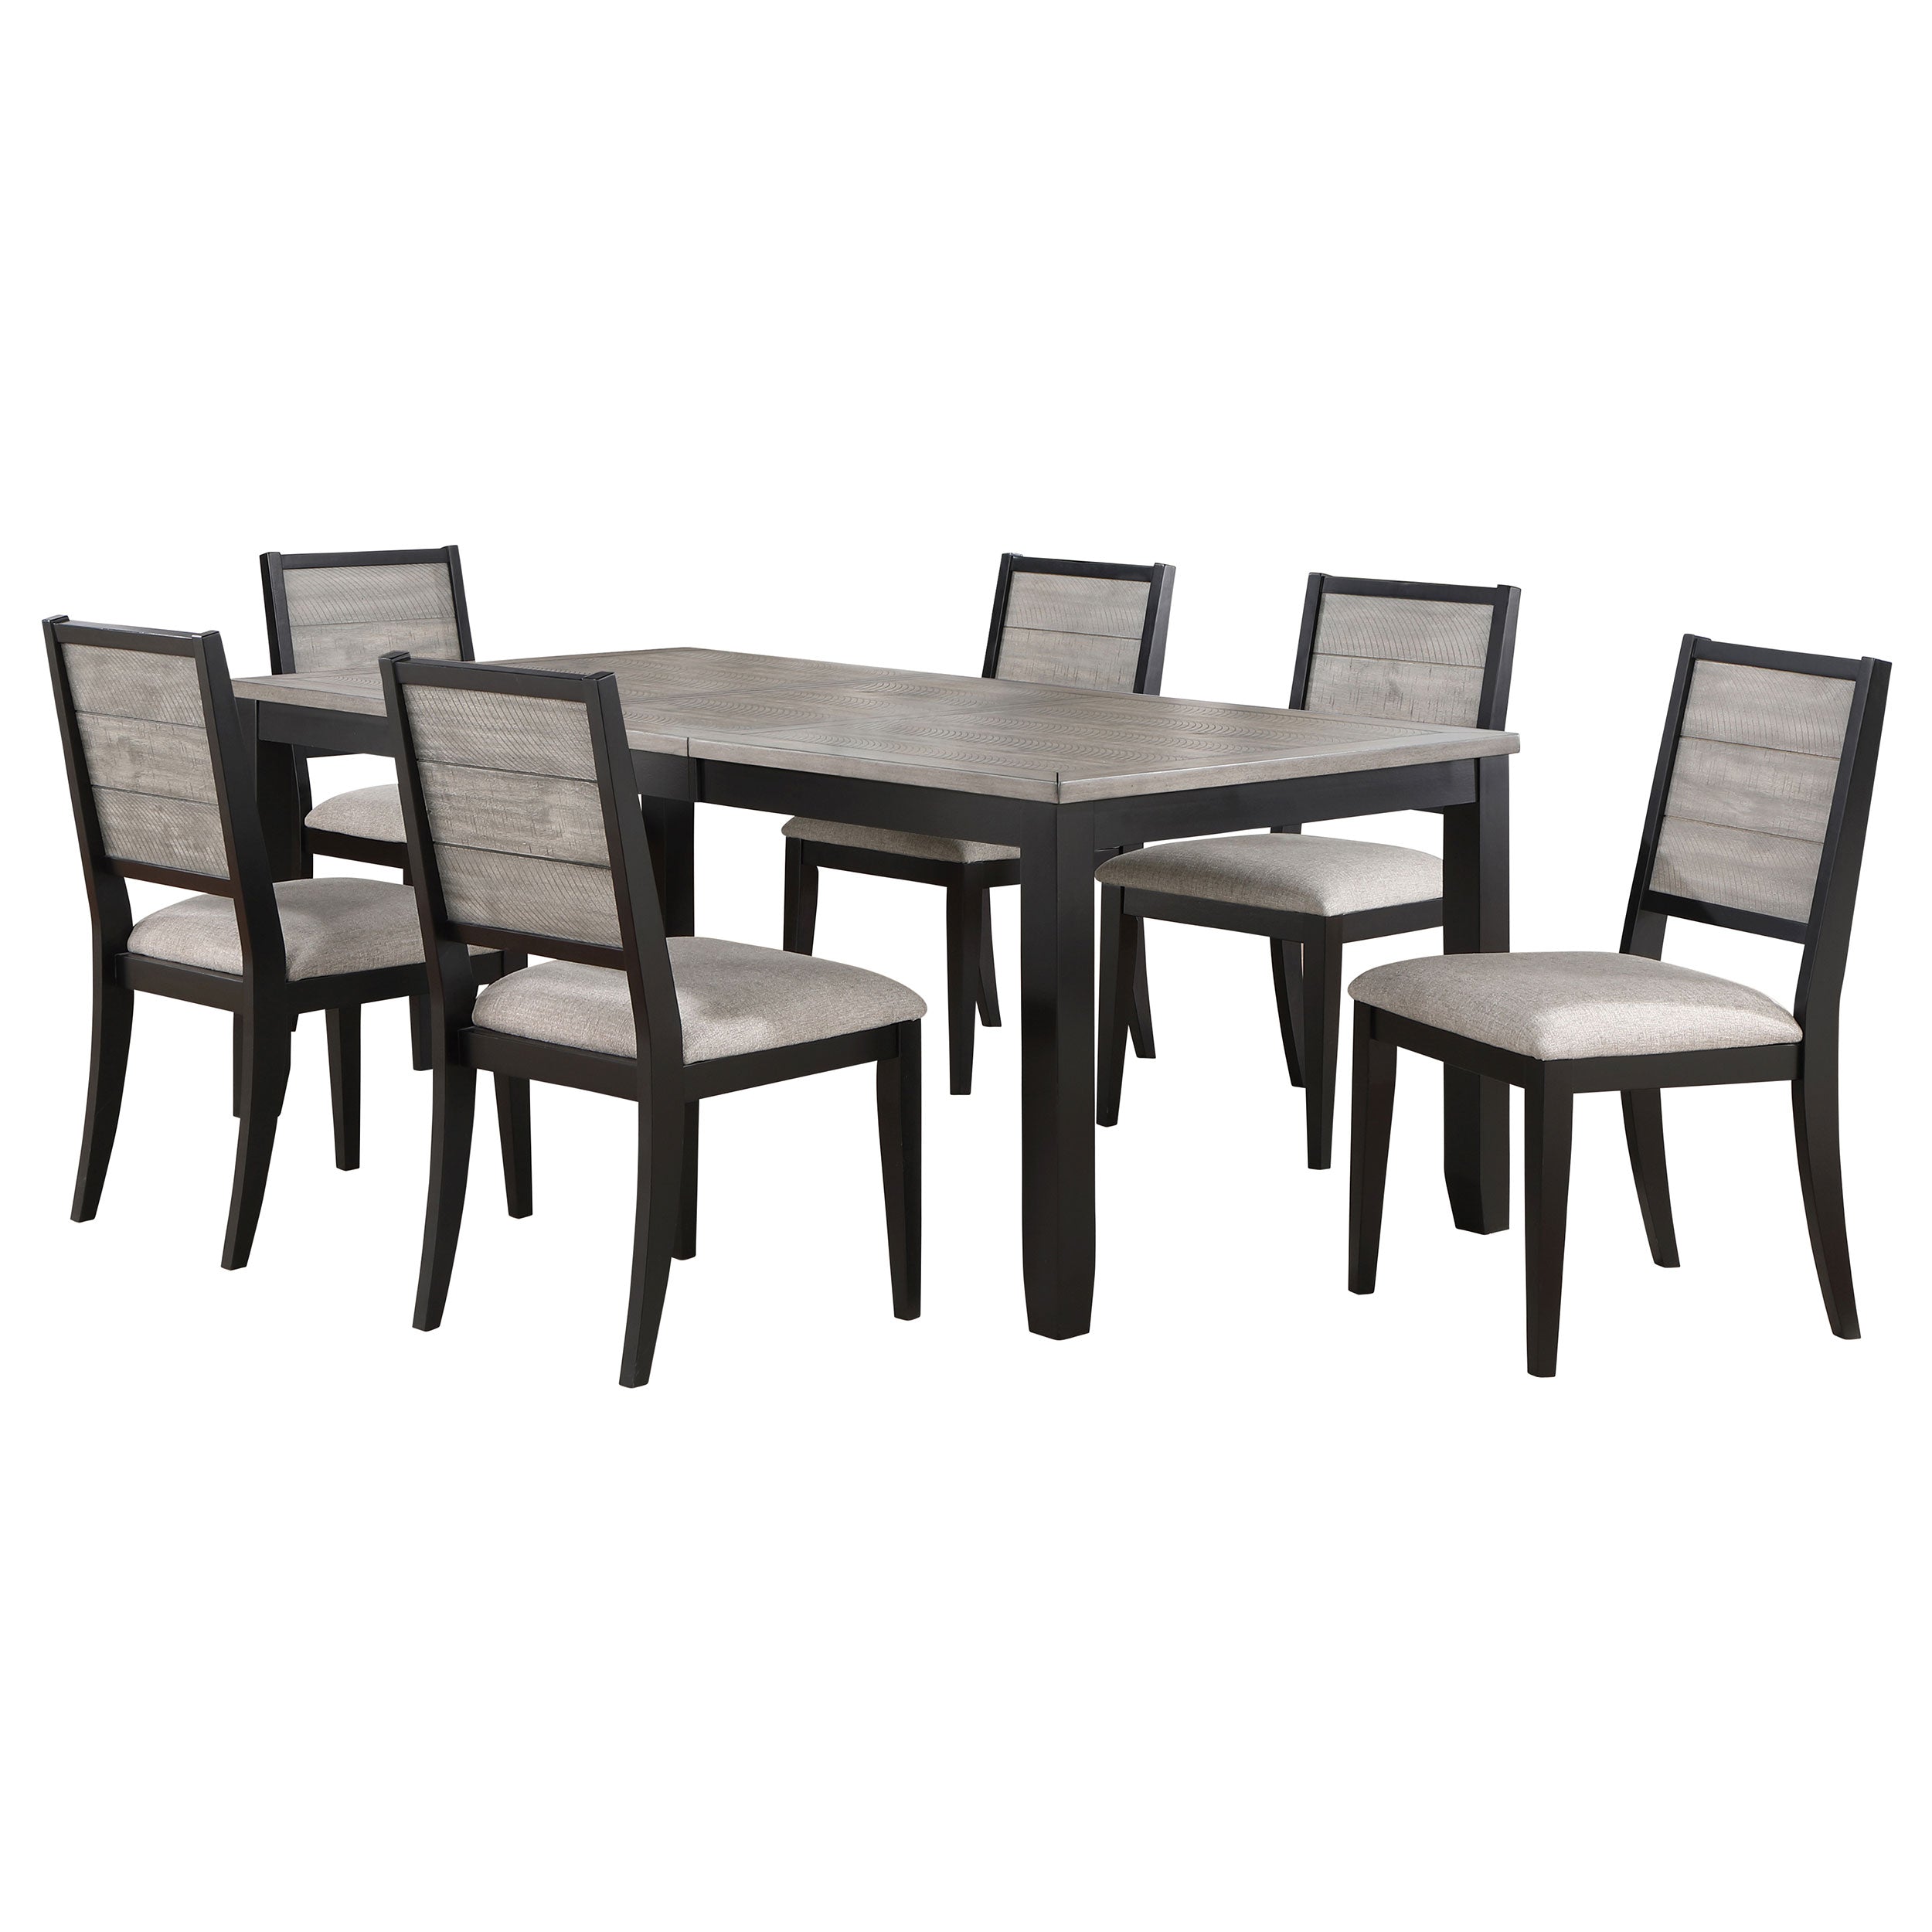 Elodie 7-piece Dining Table Set with Extension Leaf in Grey and Black